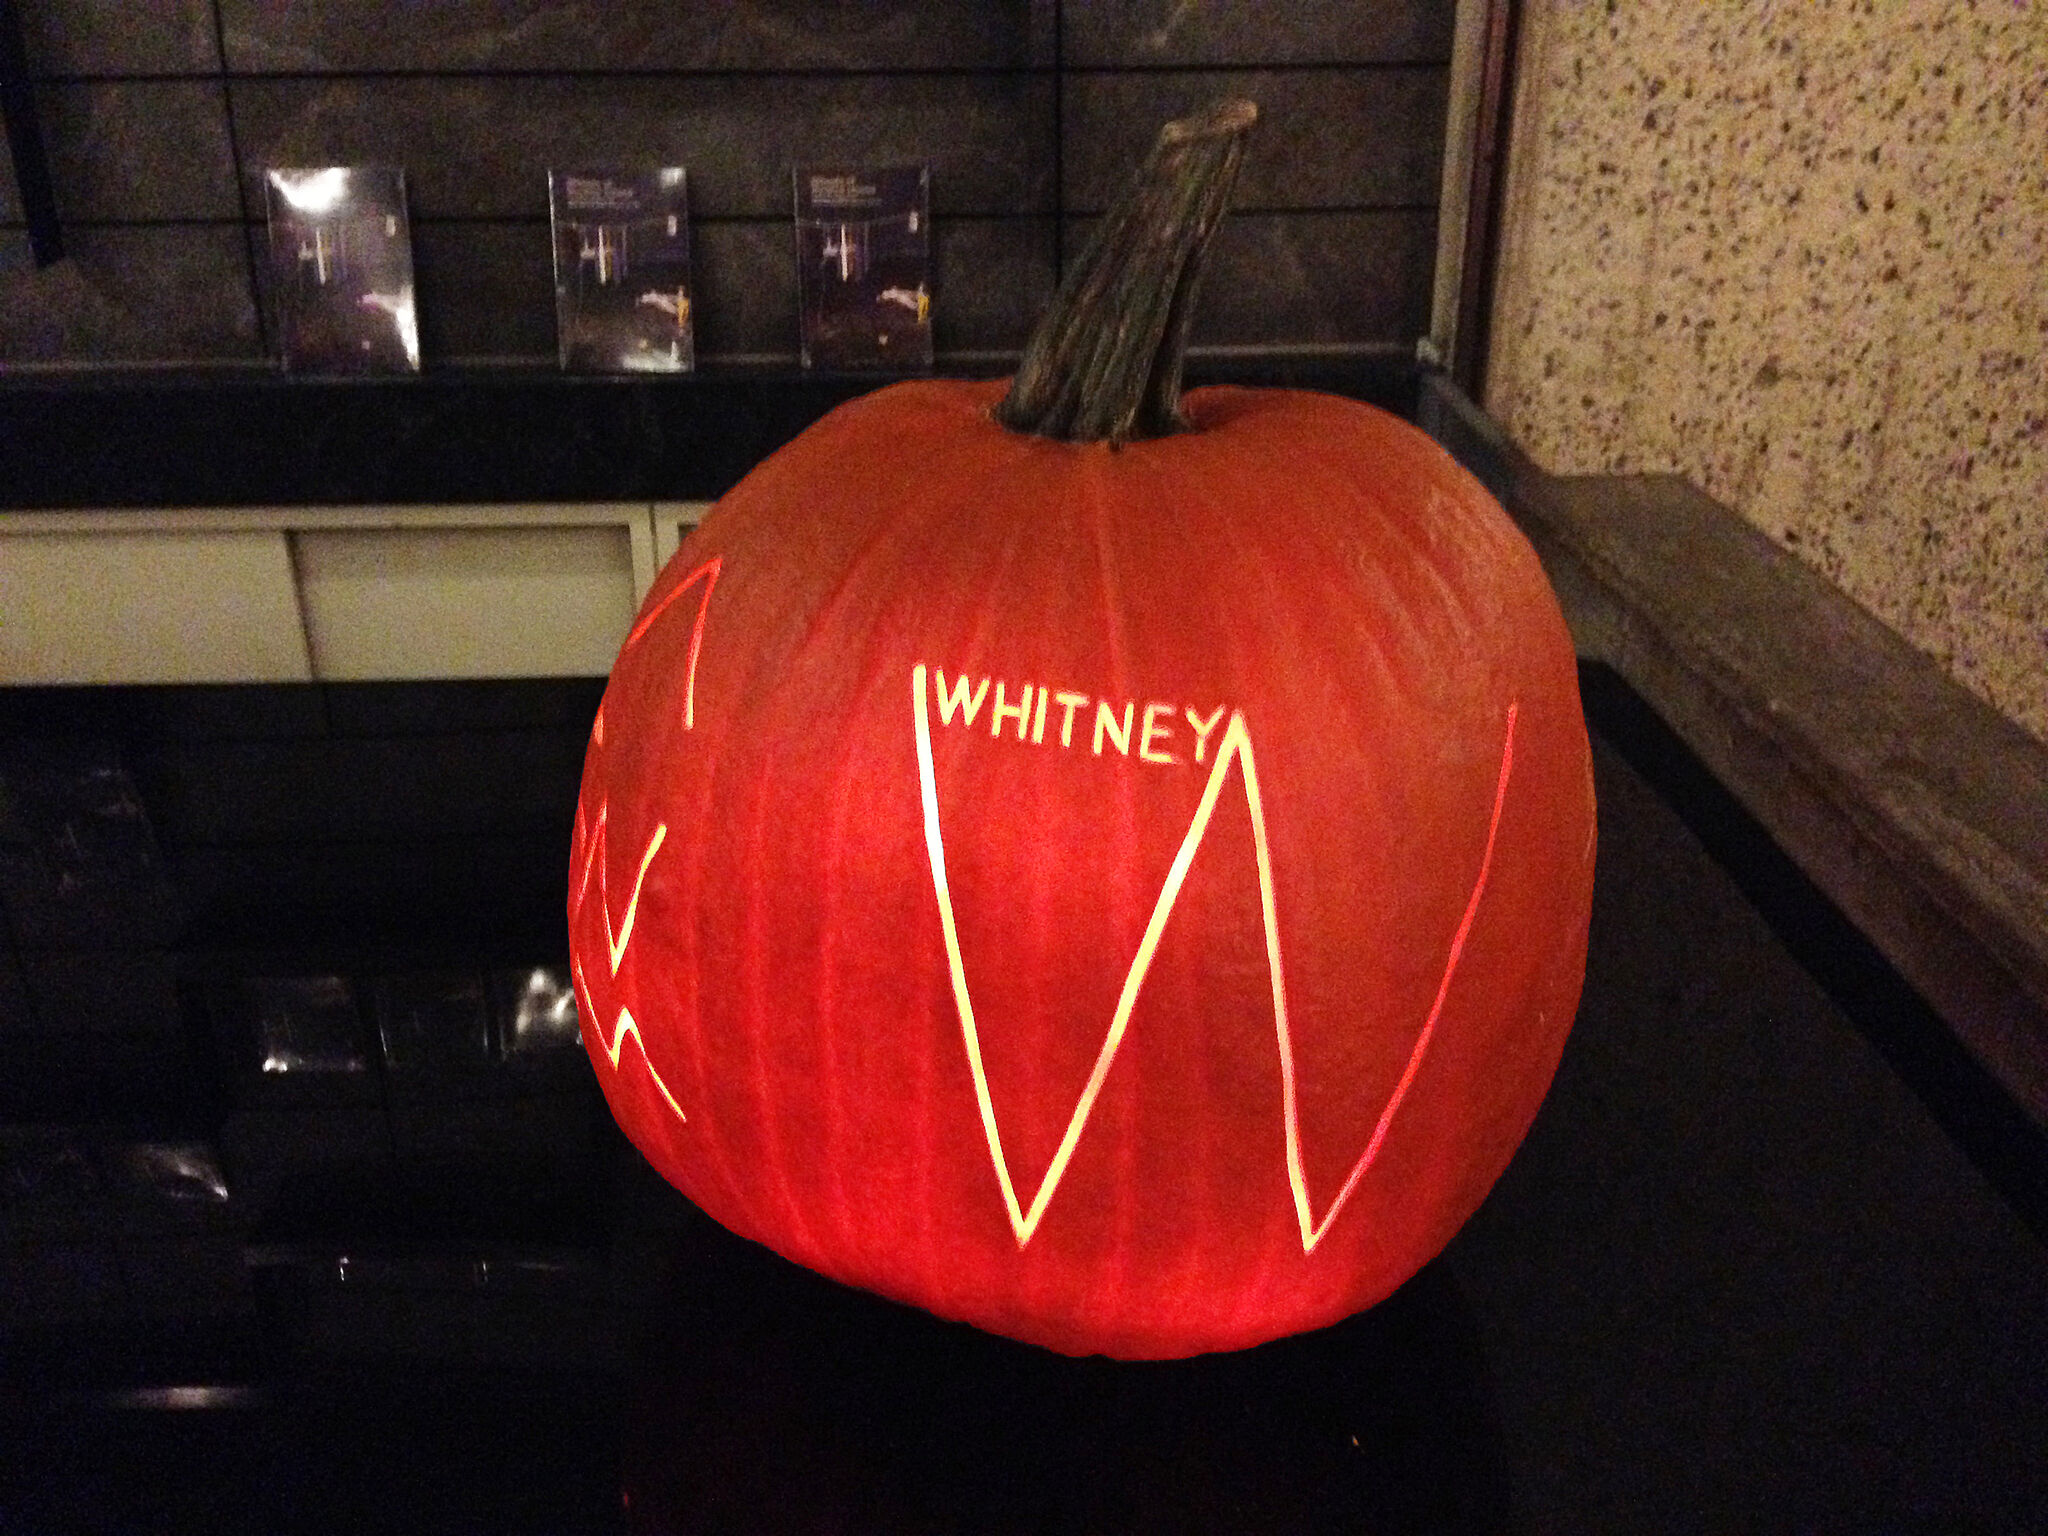 A pumpkin with a Whitney logo on it